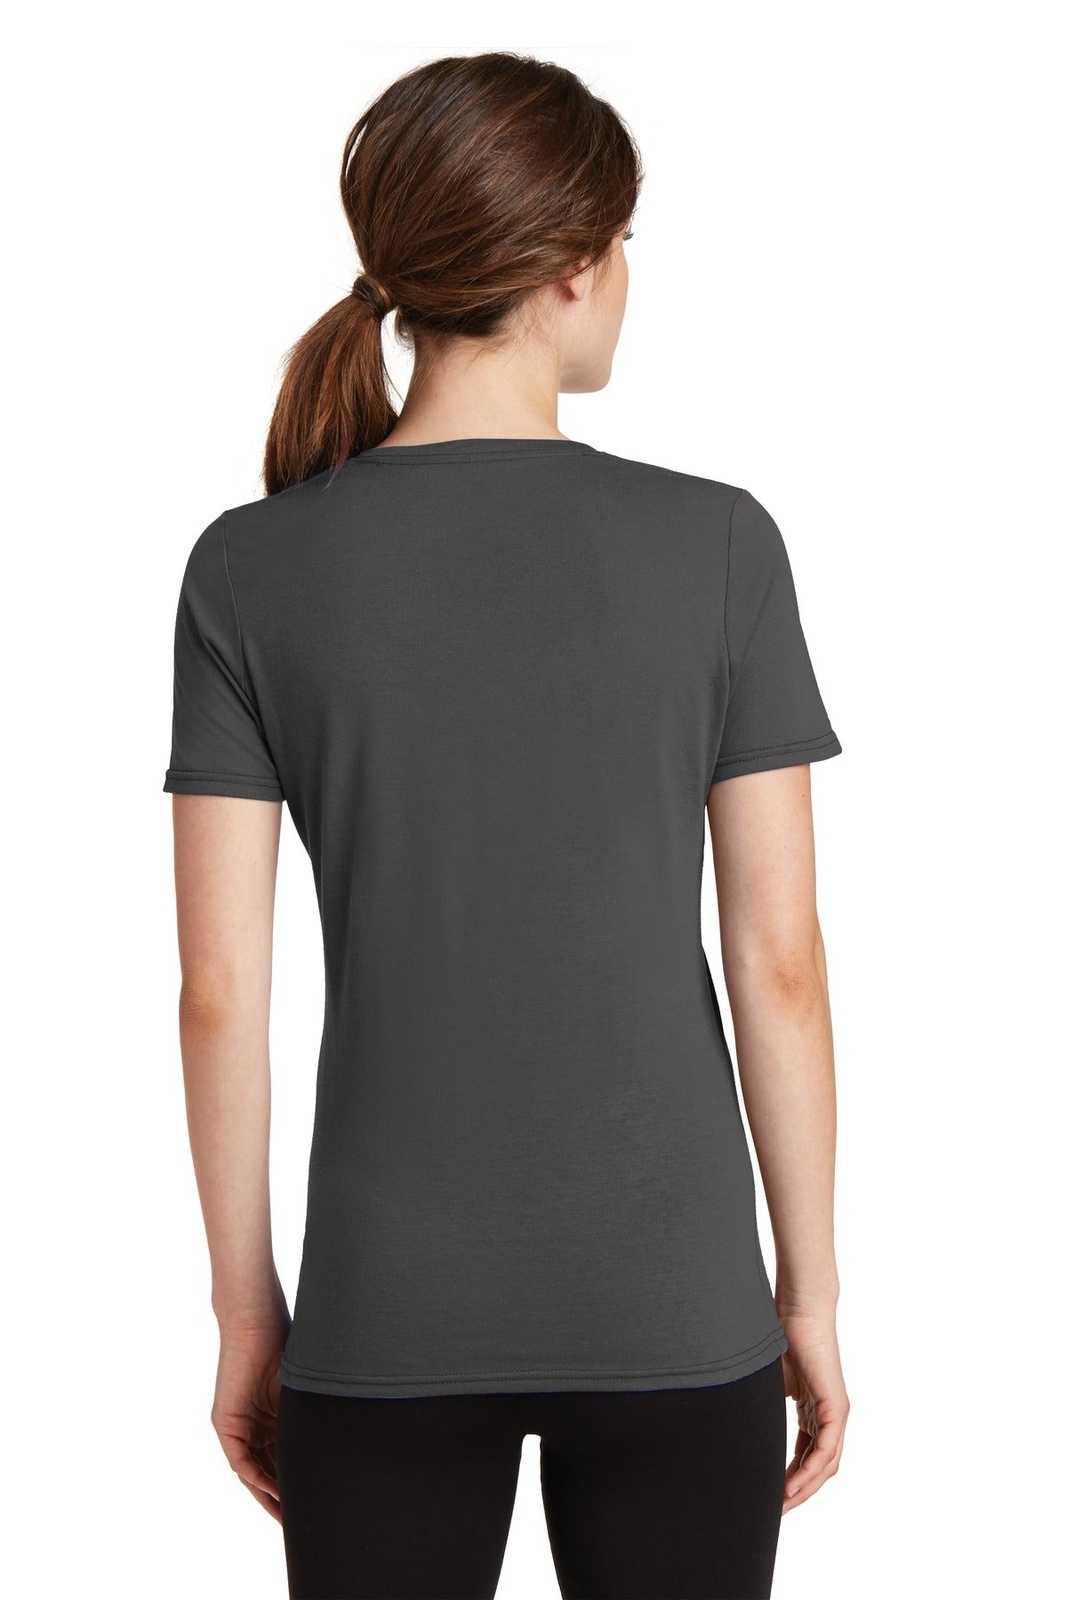 Port & Company LPC381V Ladies Performance Blend V-Neck Tee - Charcoal - HIT a Double - 1